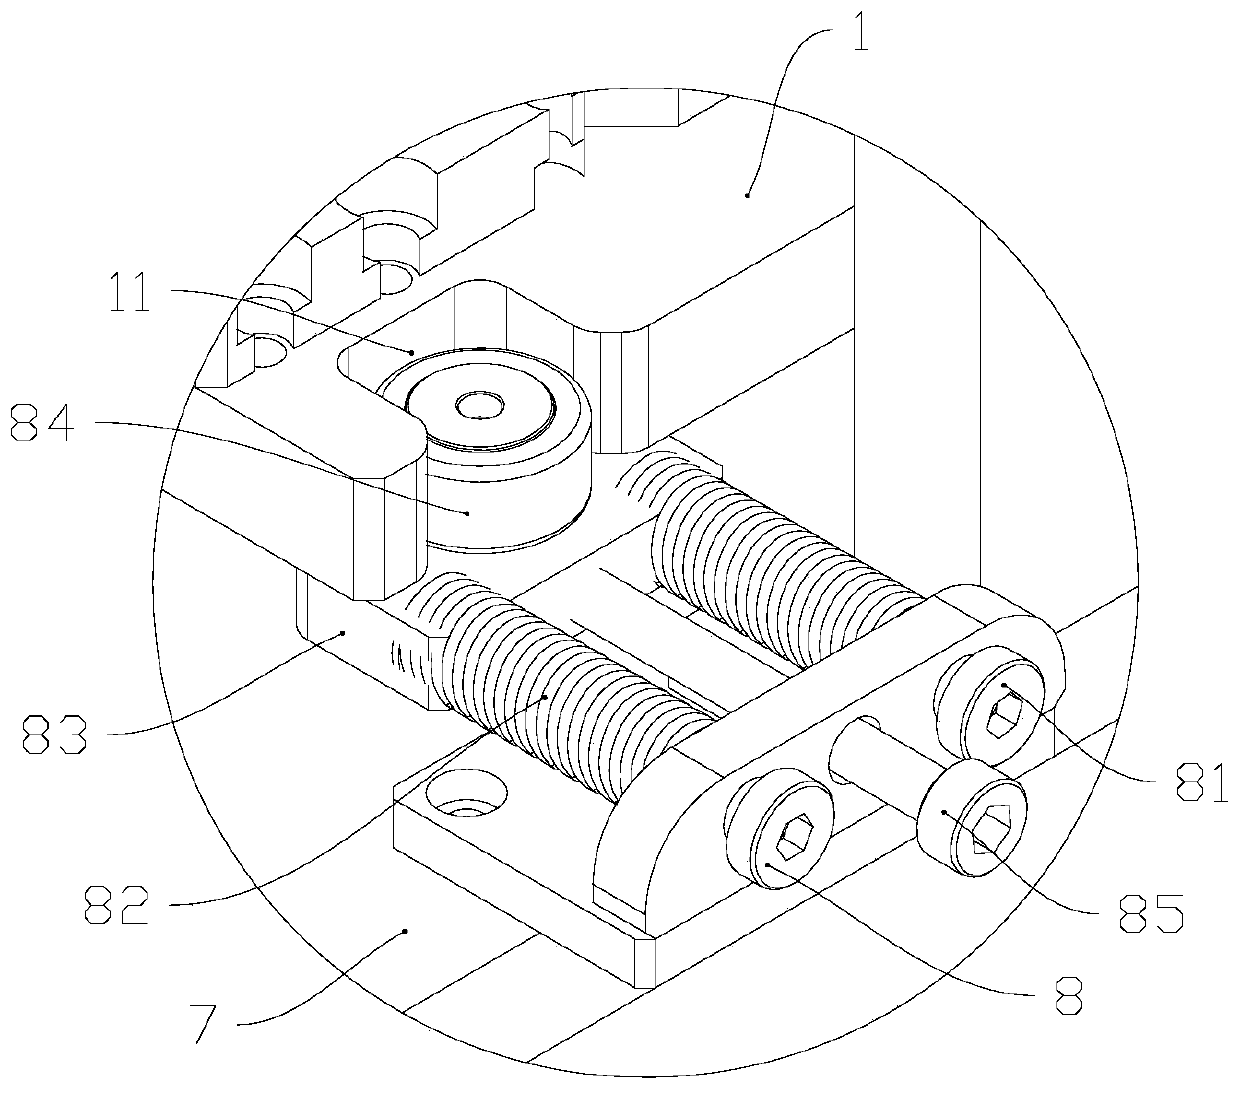 Battery clamp and battery assembly method